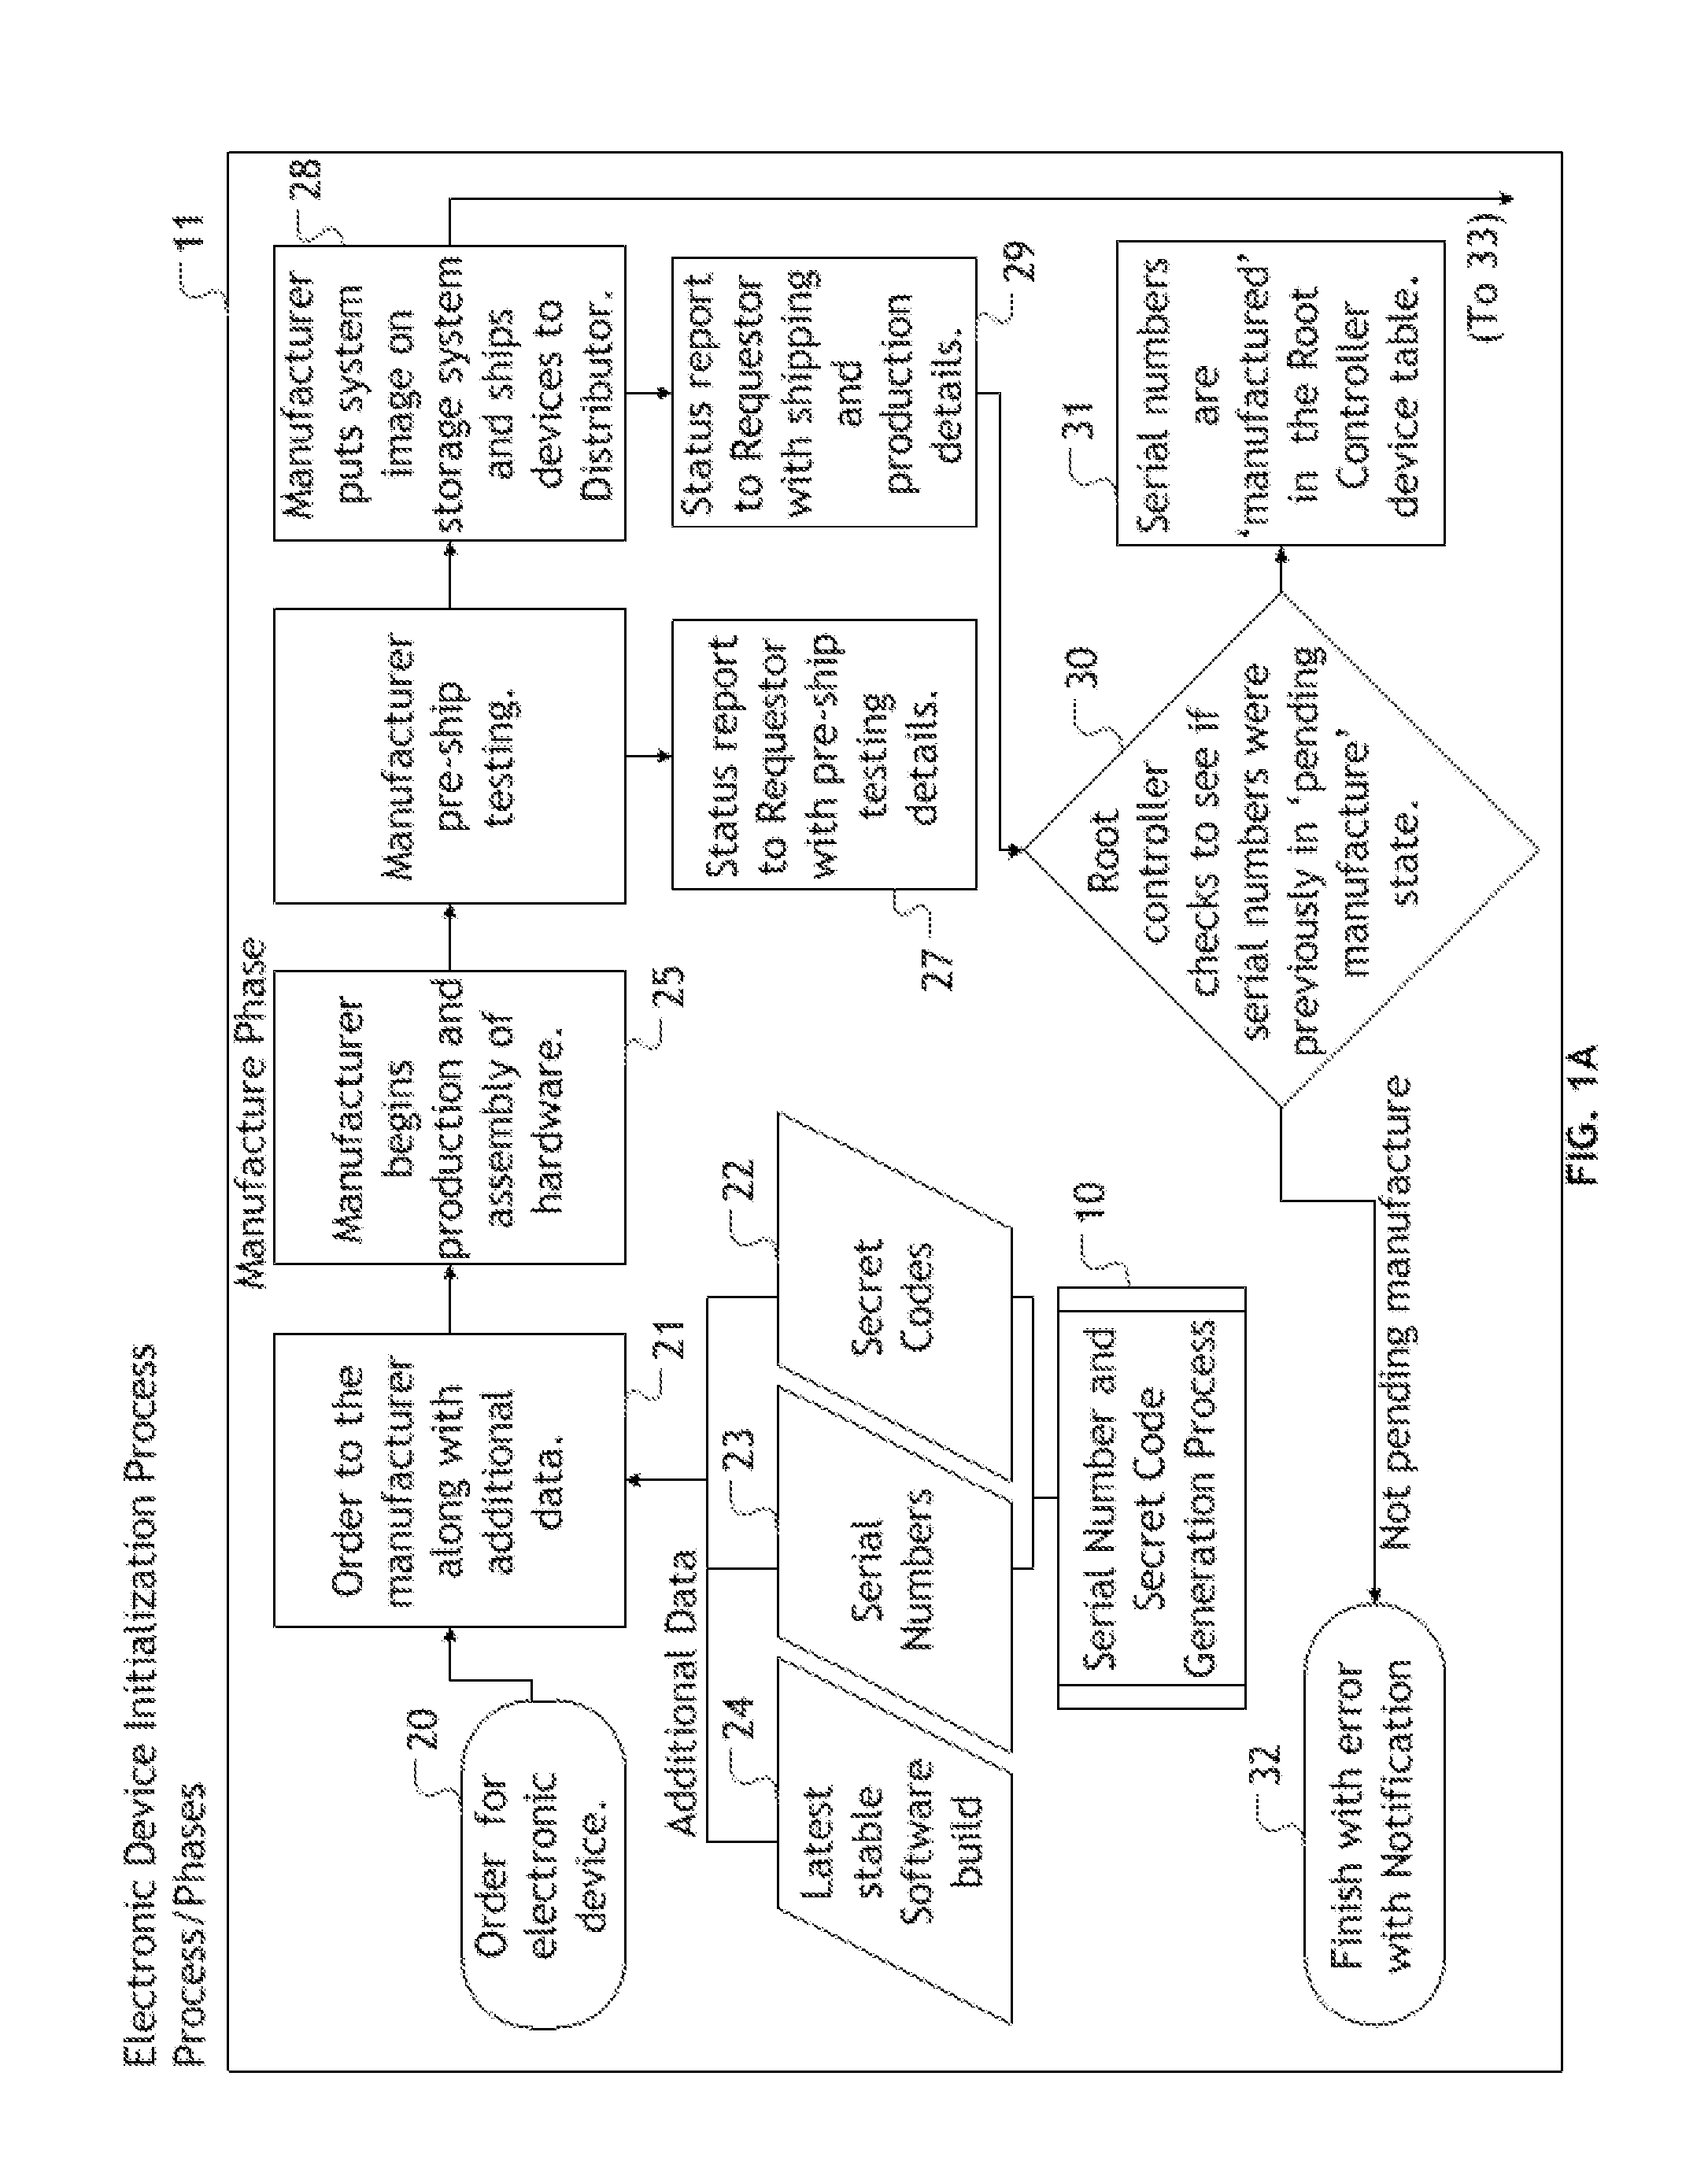 Secure installation of encryption enabling software onto electronic devices